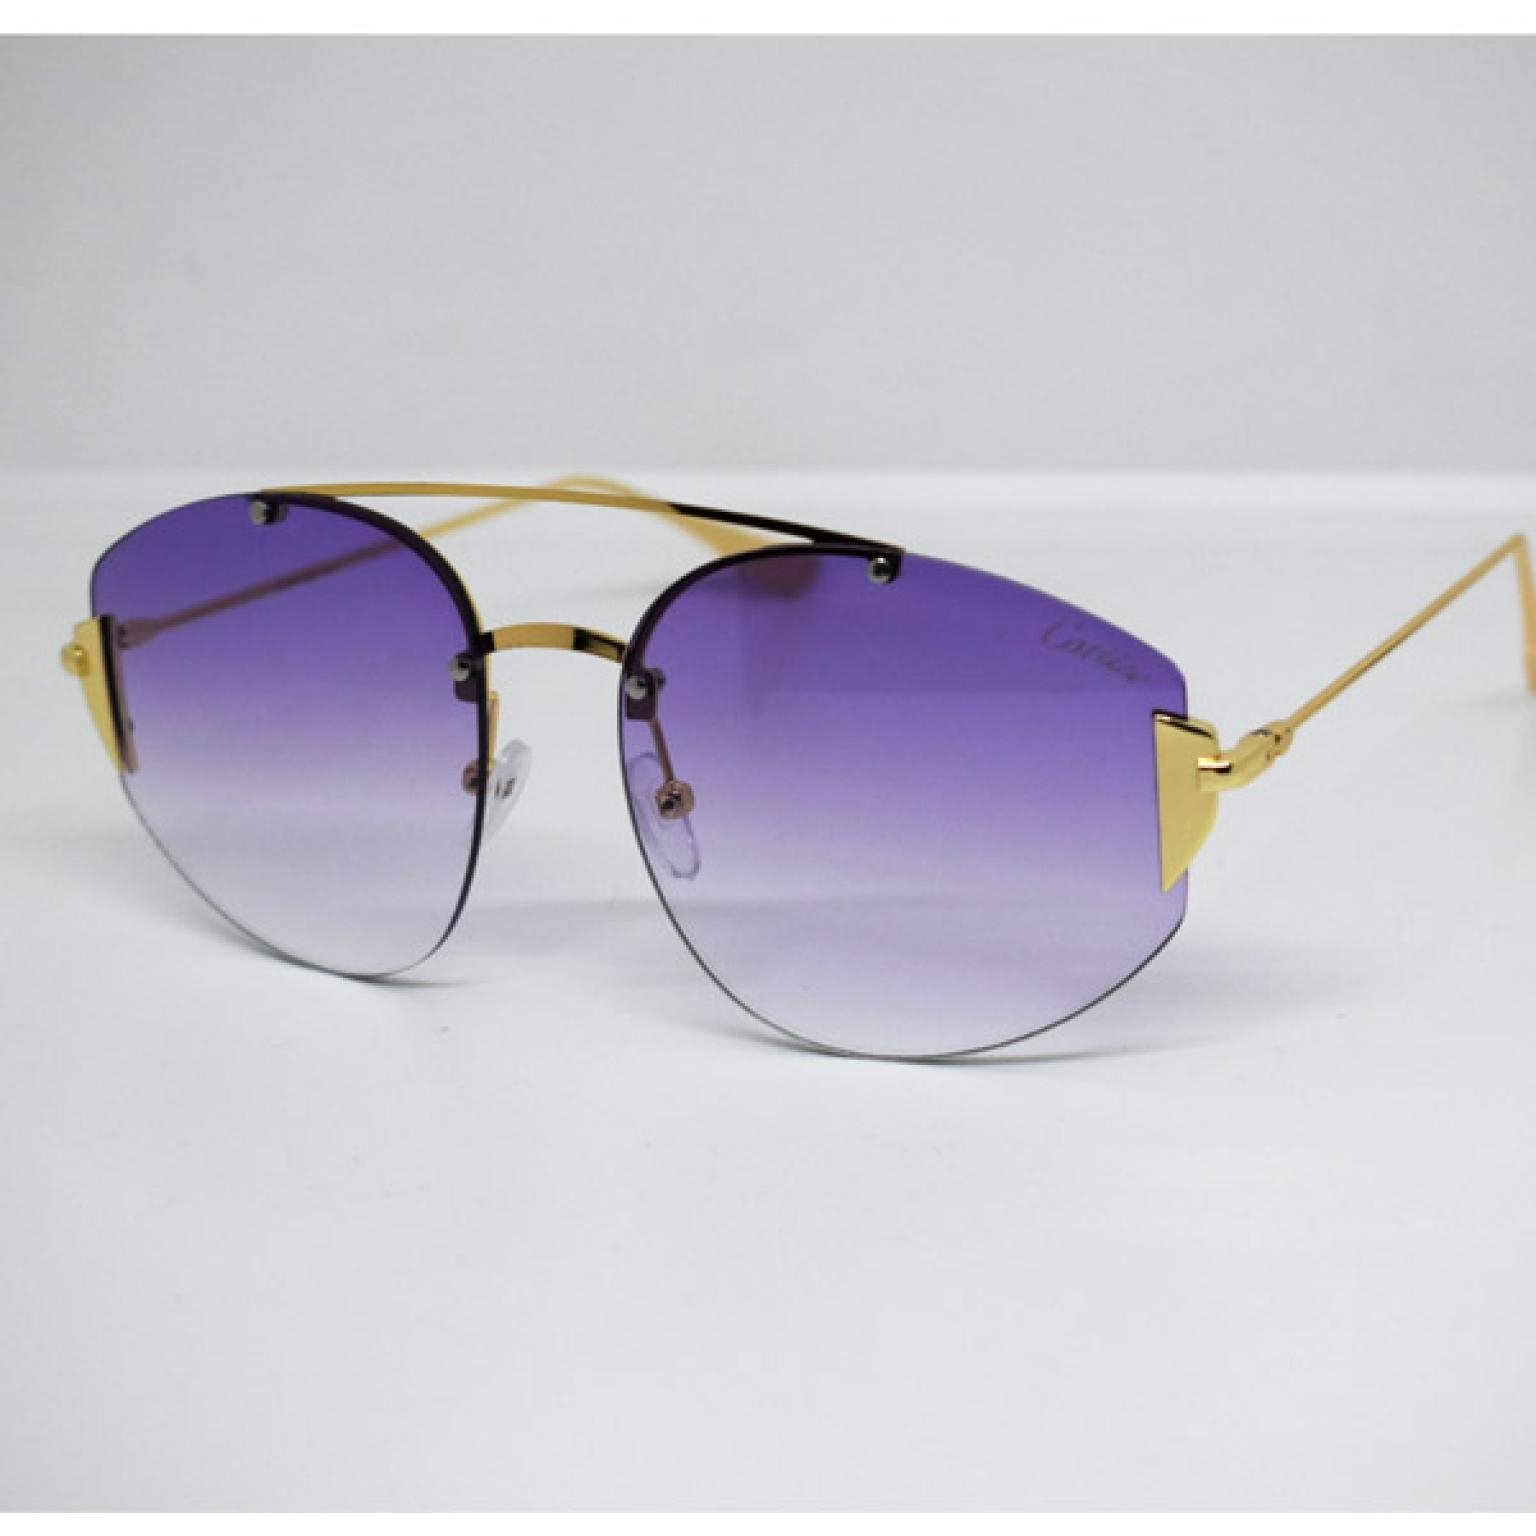 Ladies Trendy Sunglass Purple Lens With Golden Frame For Women |SGM-90|